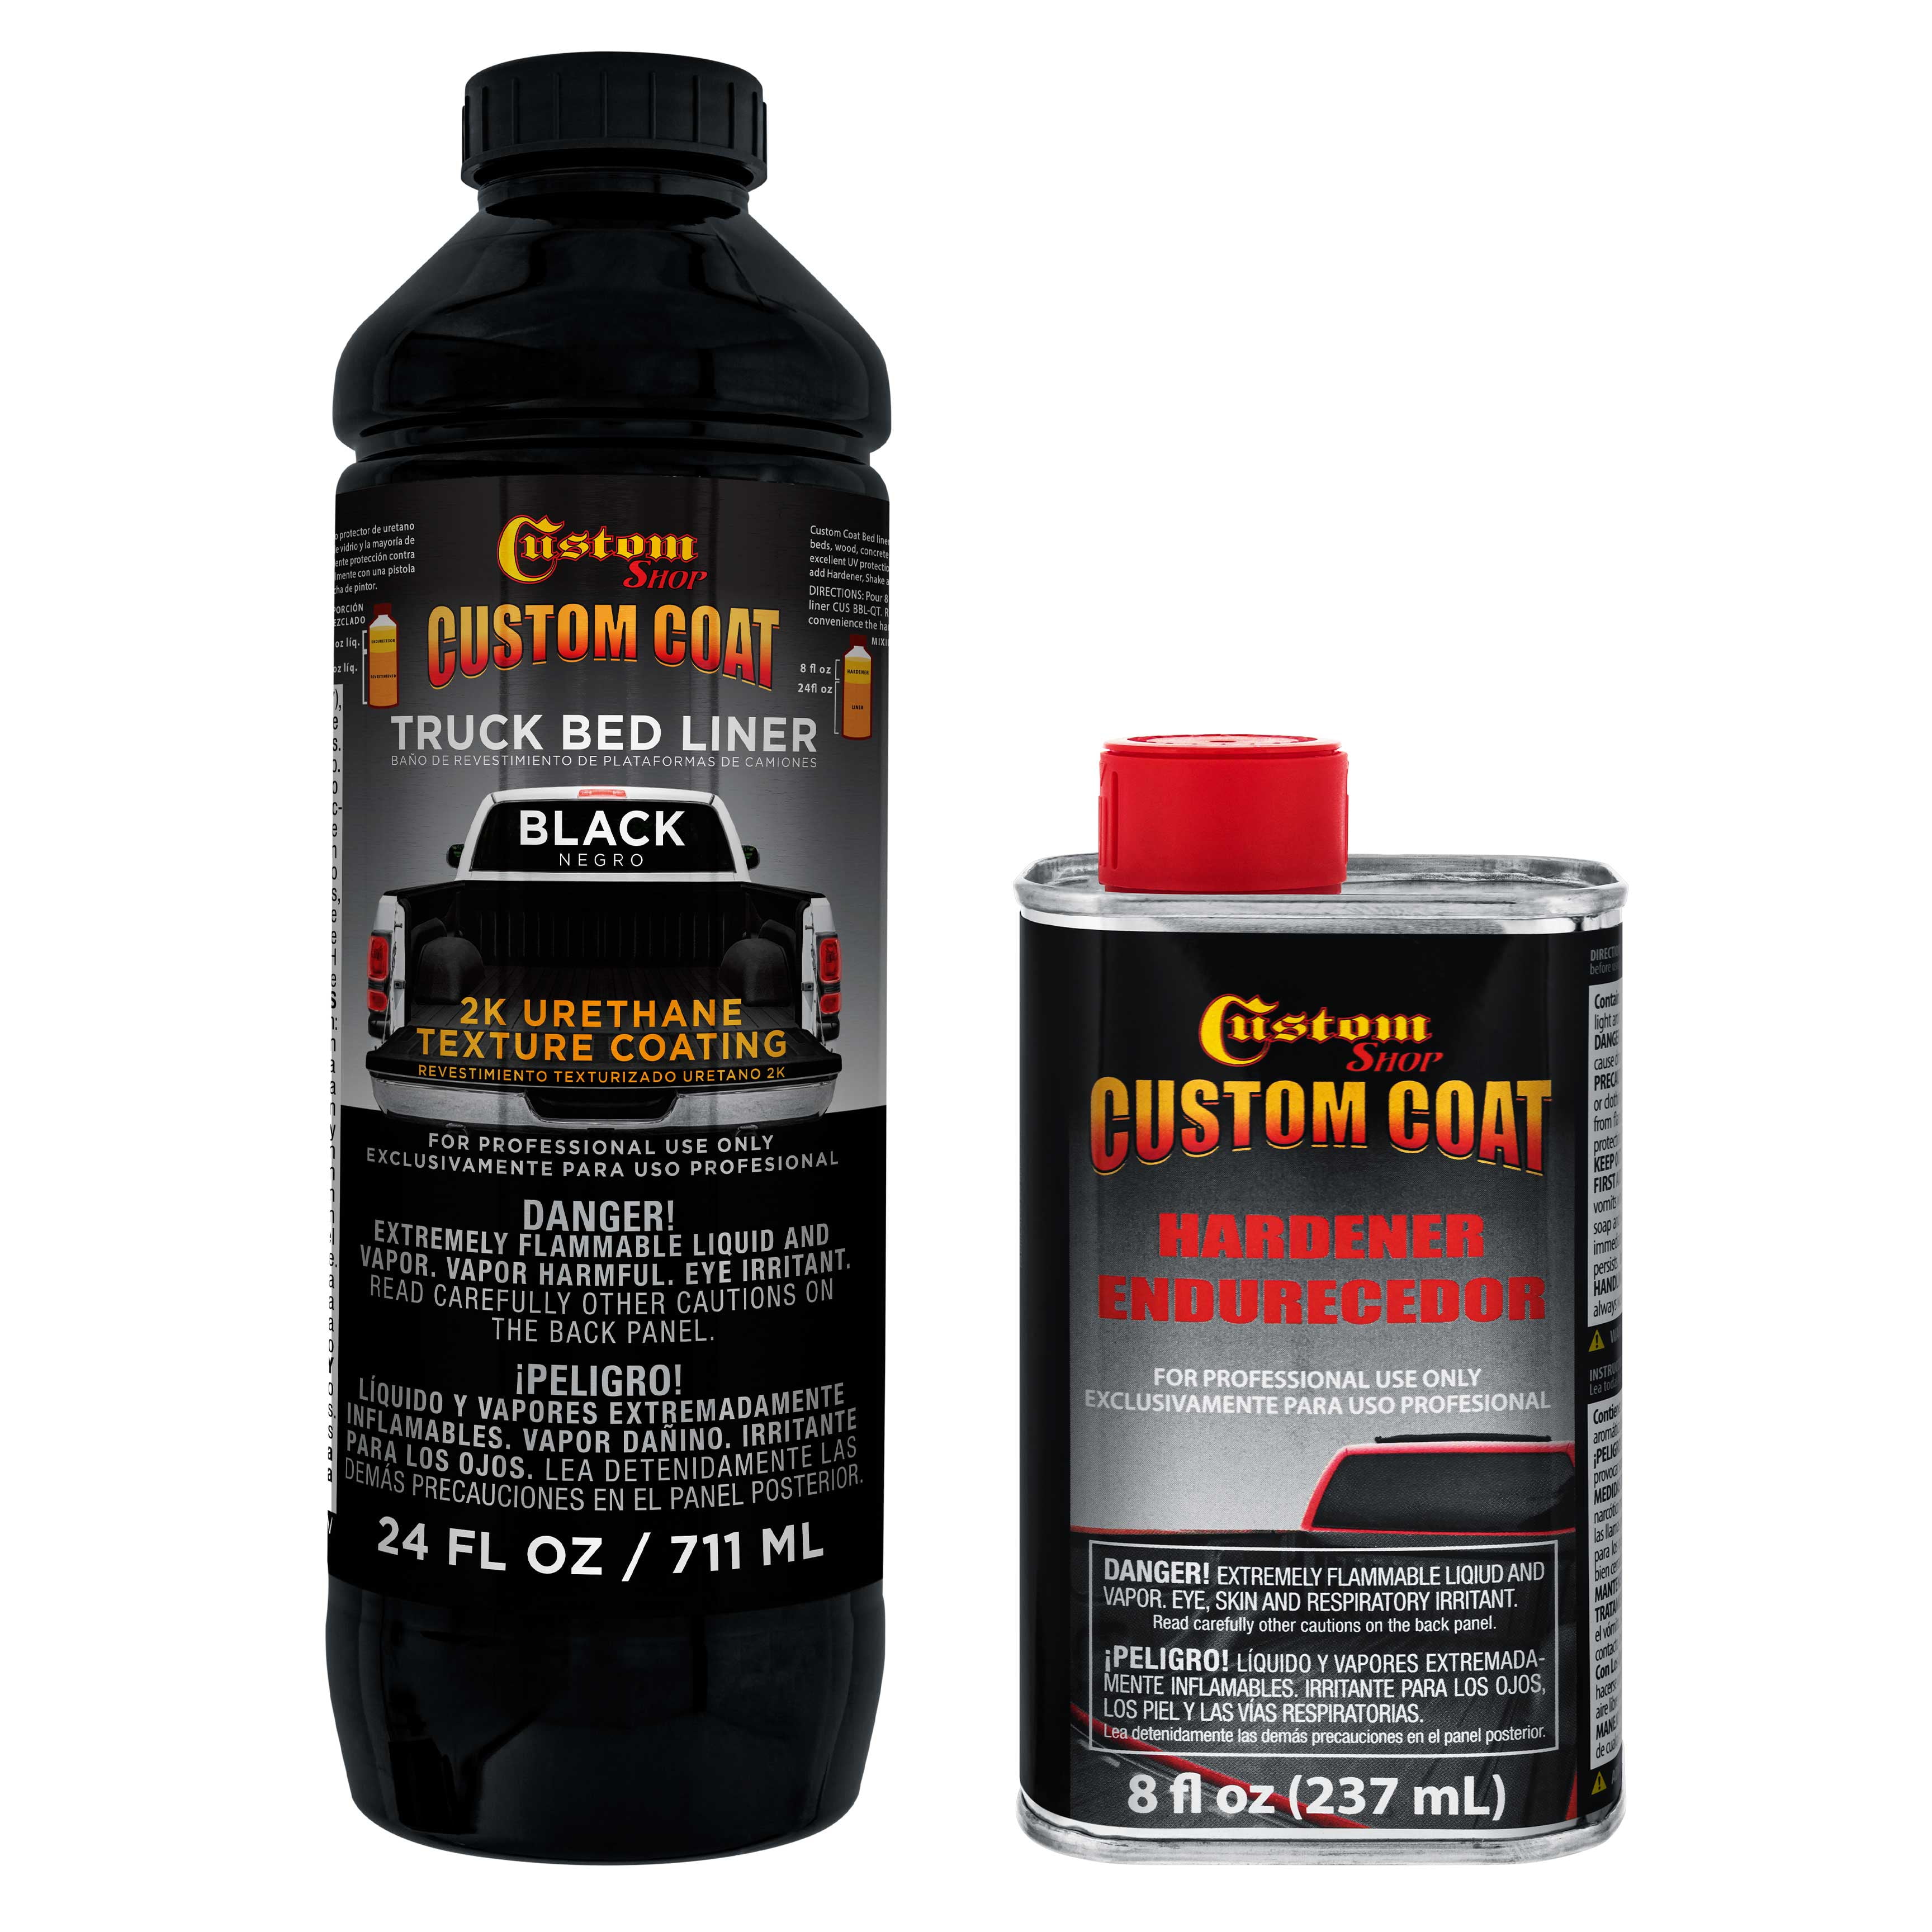 Spray On Bed Liner; Truck Bed Coating, Black; Low Odor, Water-Based  Formula, No Hassle of Mixing Components; Bedliner Kit: 8 Quarts + 1 Air  Spray Gun